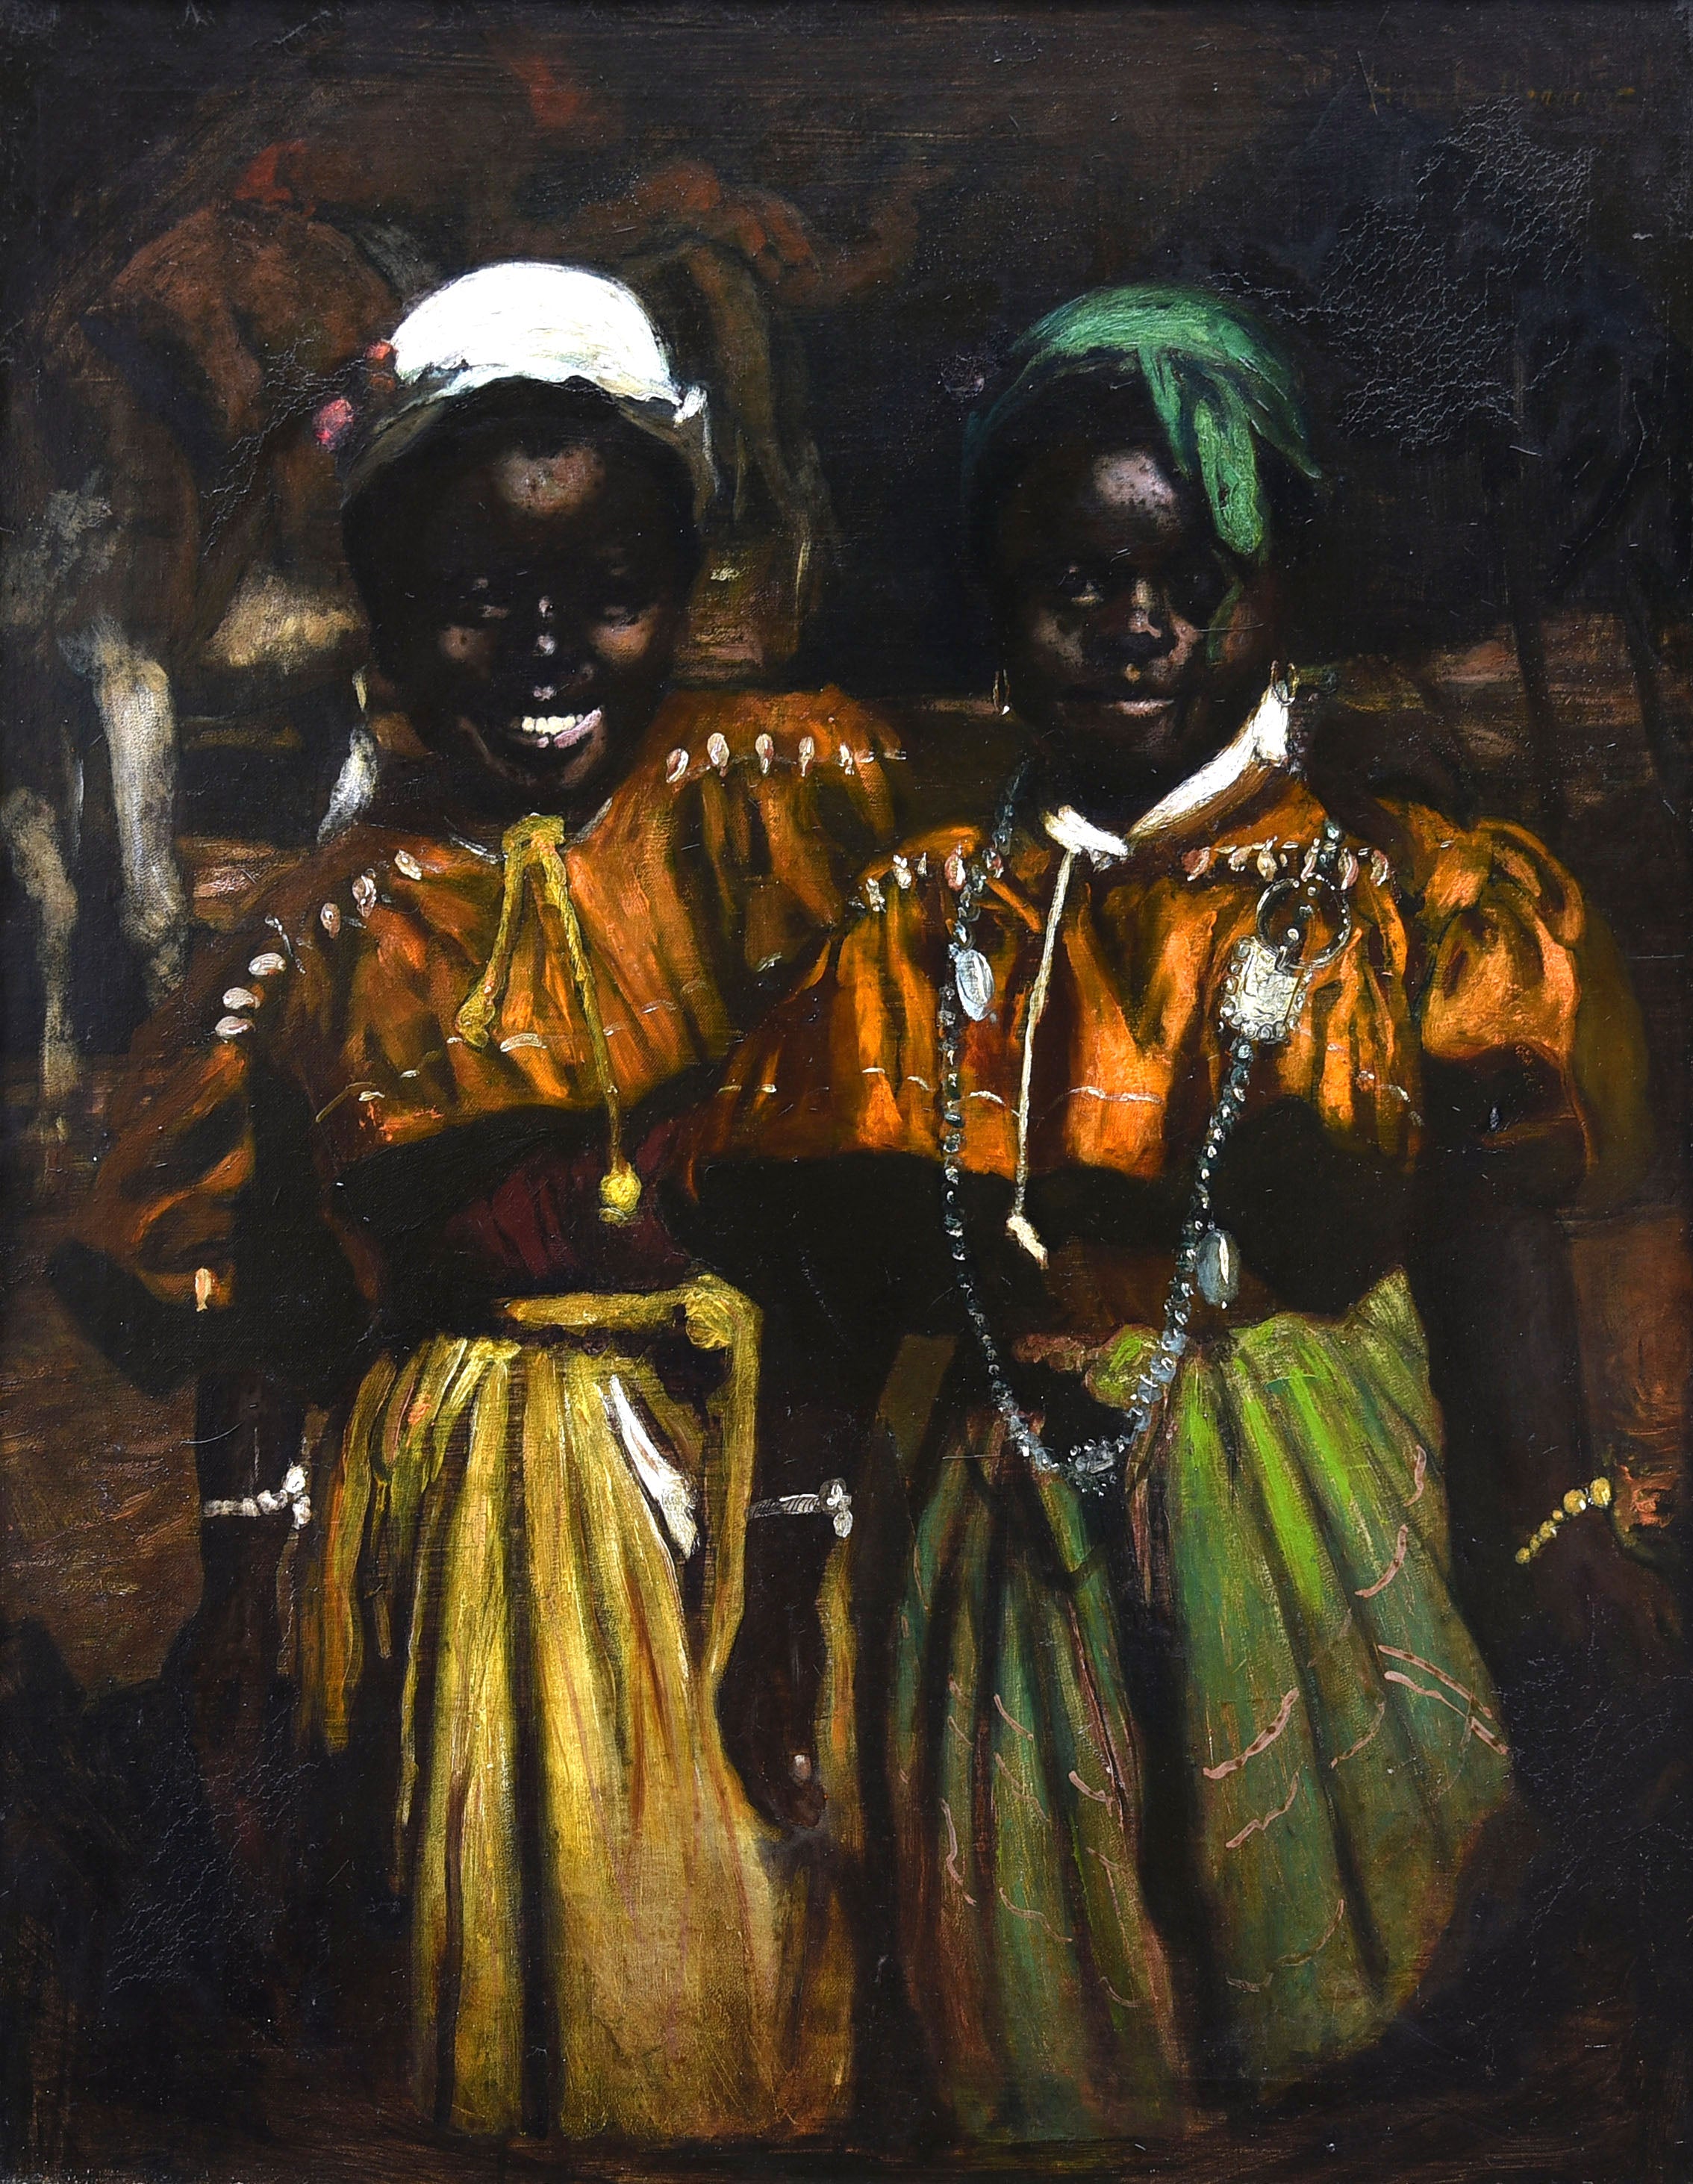 Two Creole girls in Colorful Folk Costumes